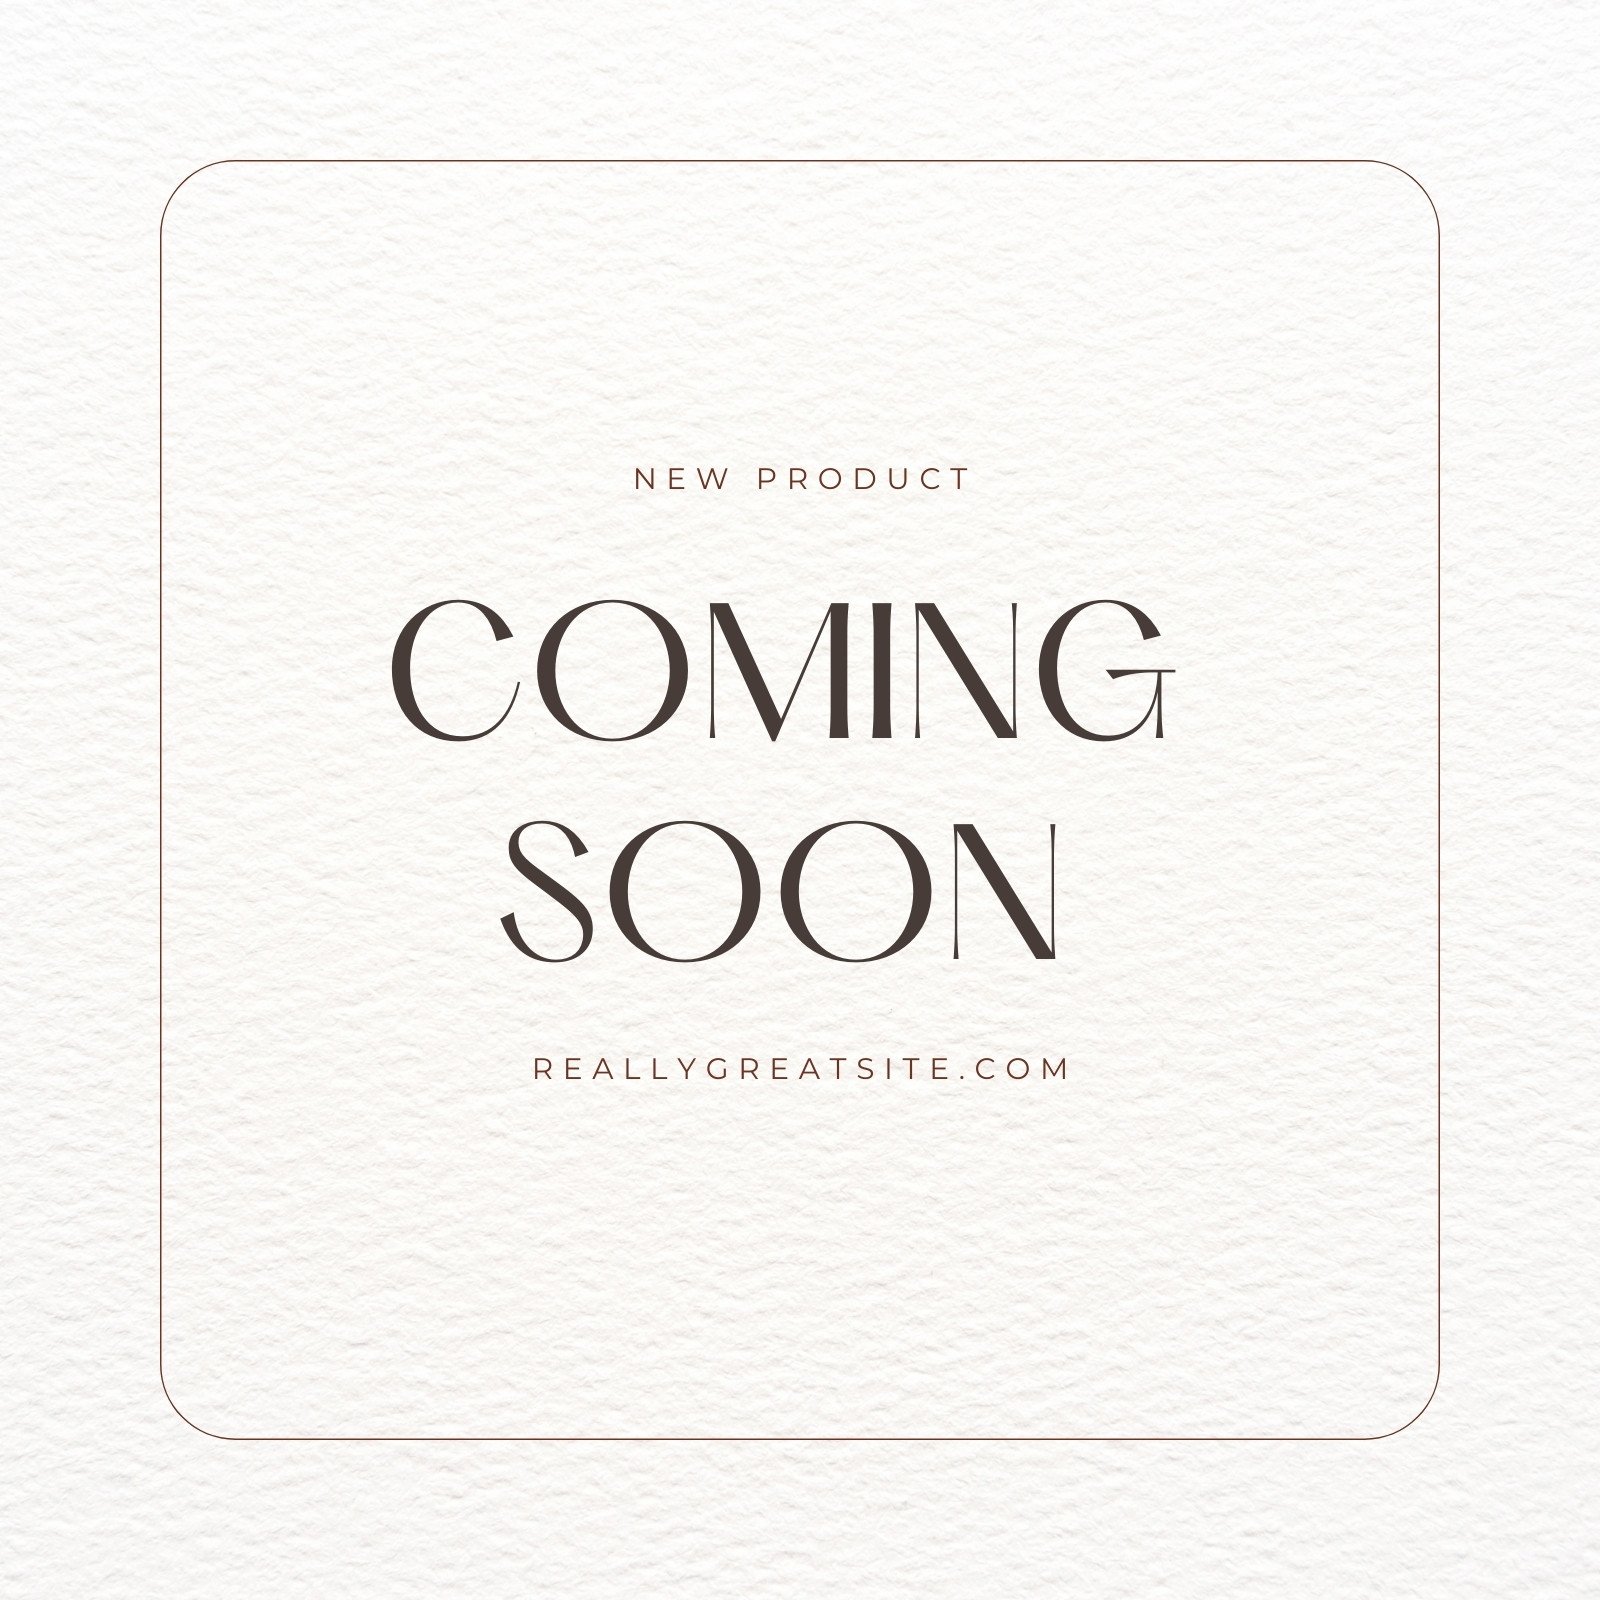 Coming Soon Announcement Template